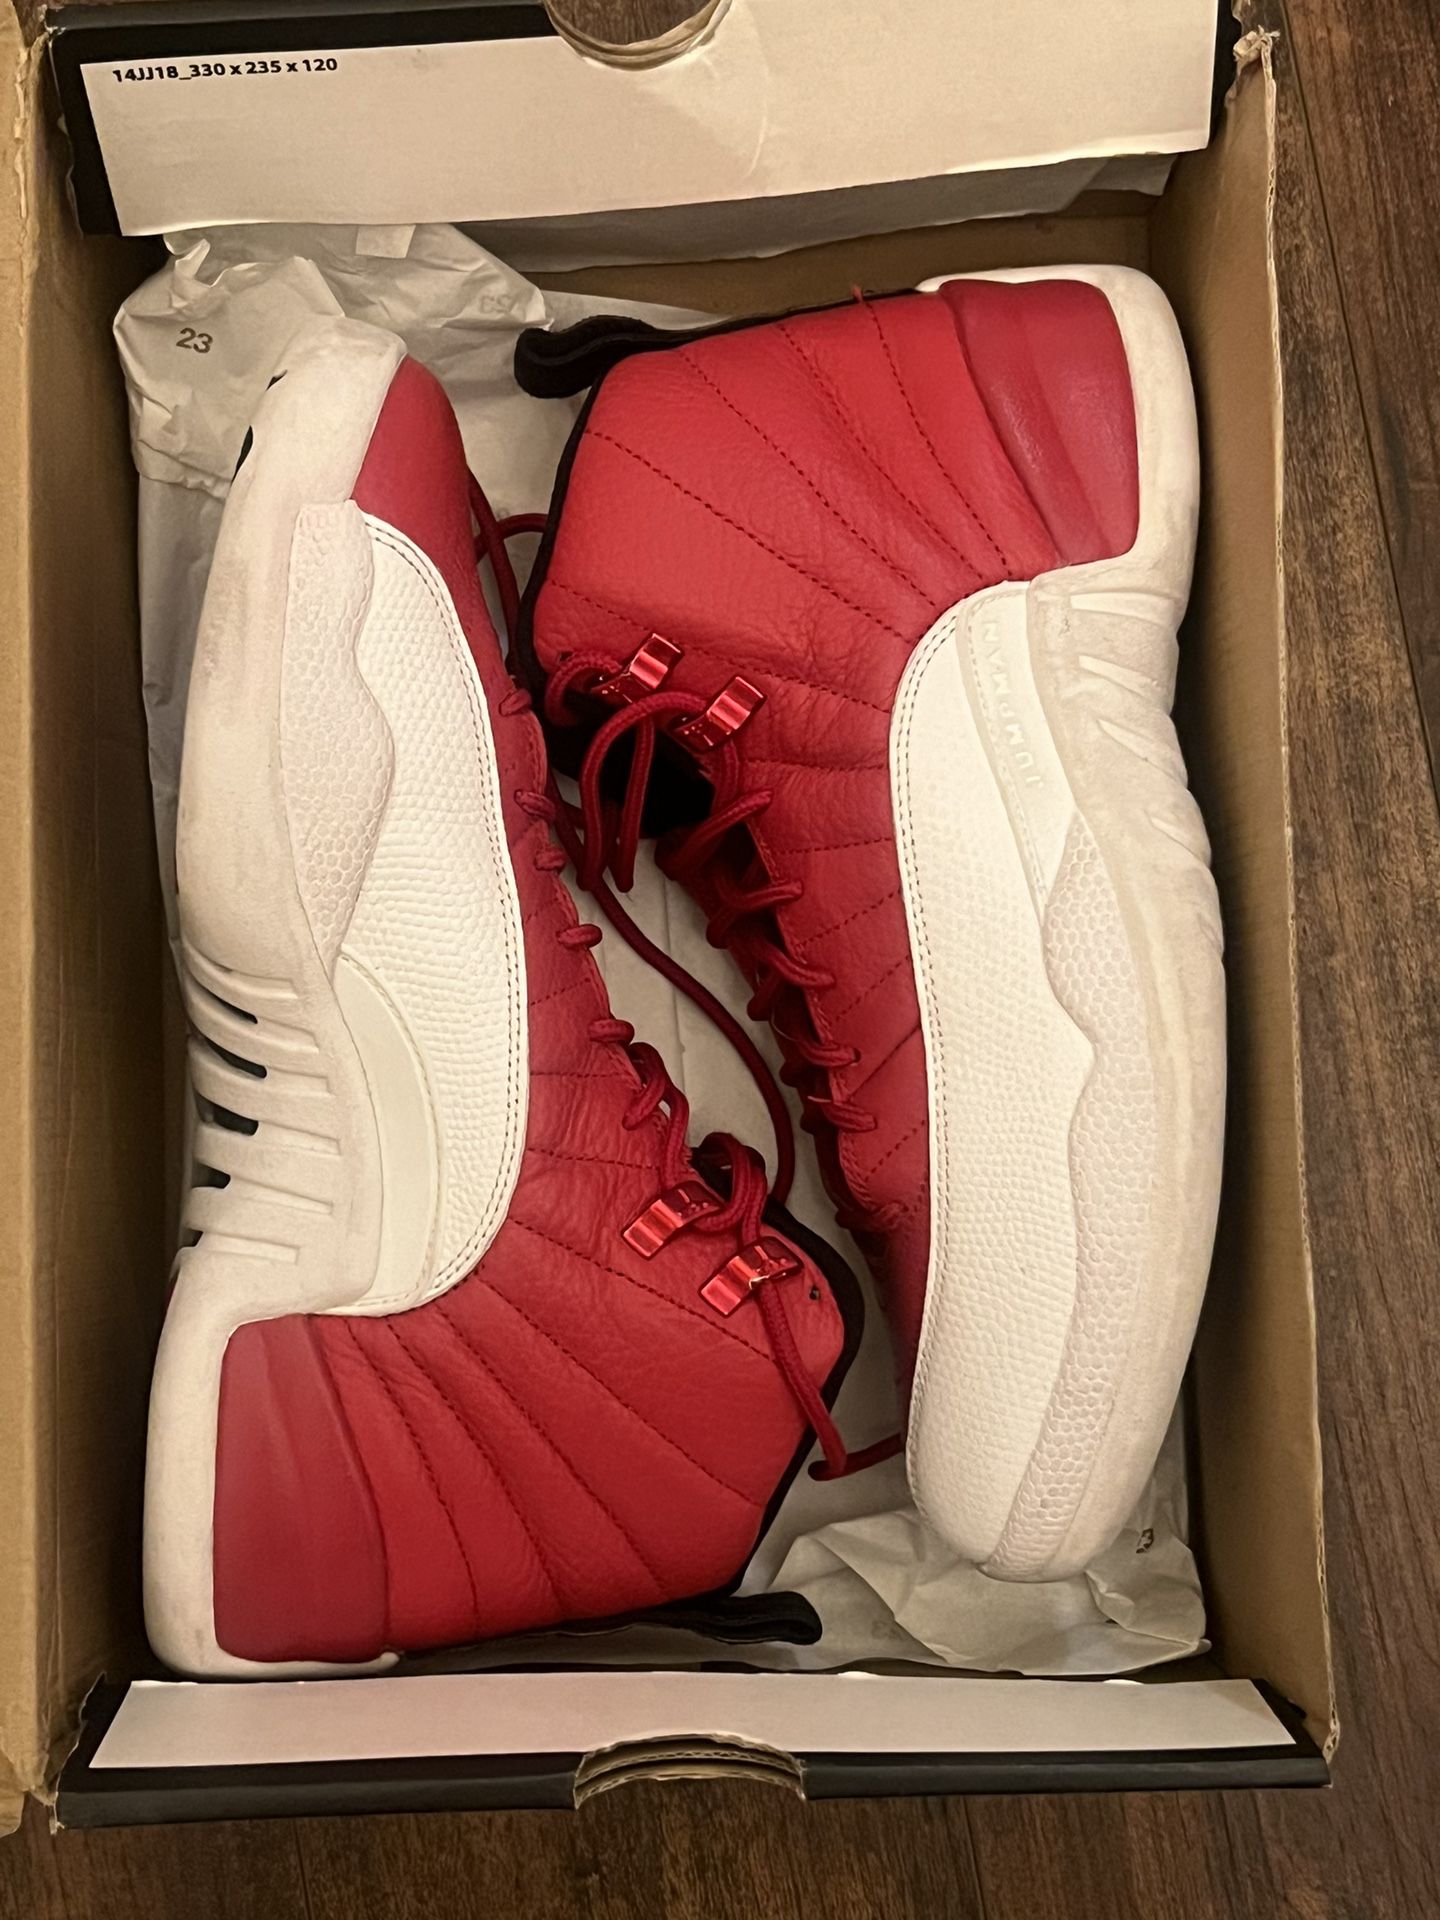 Air Jordan  Gg red and white 12s